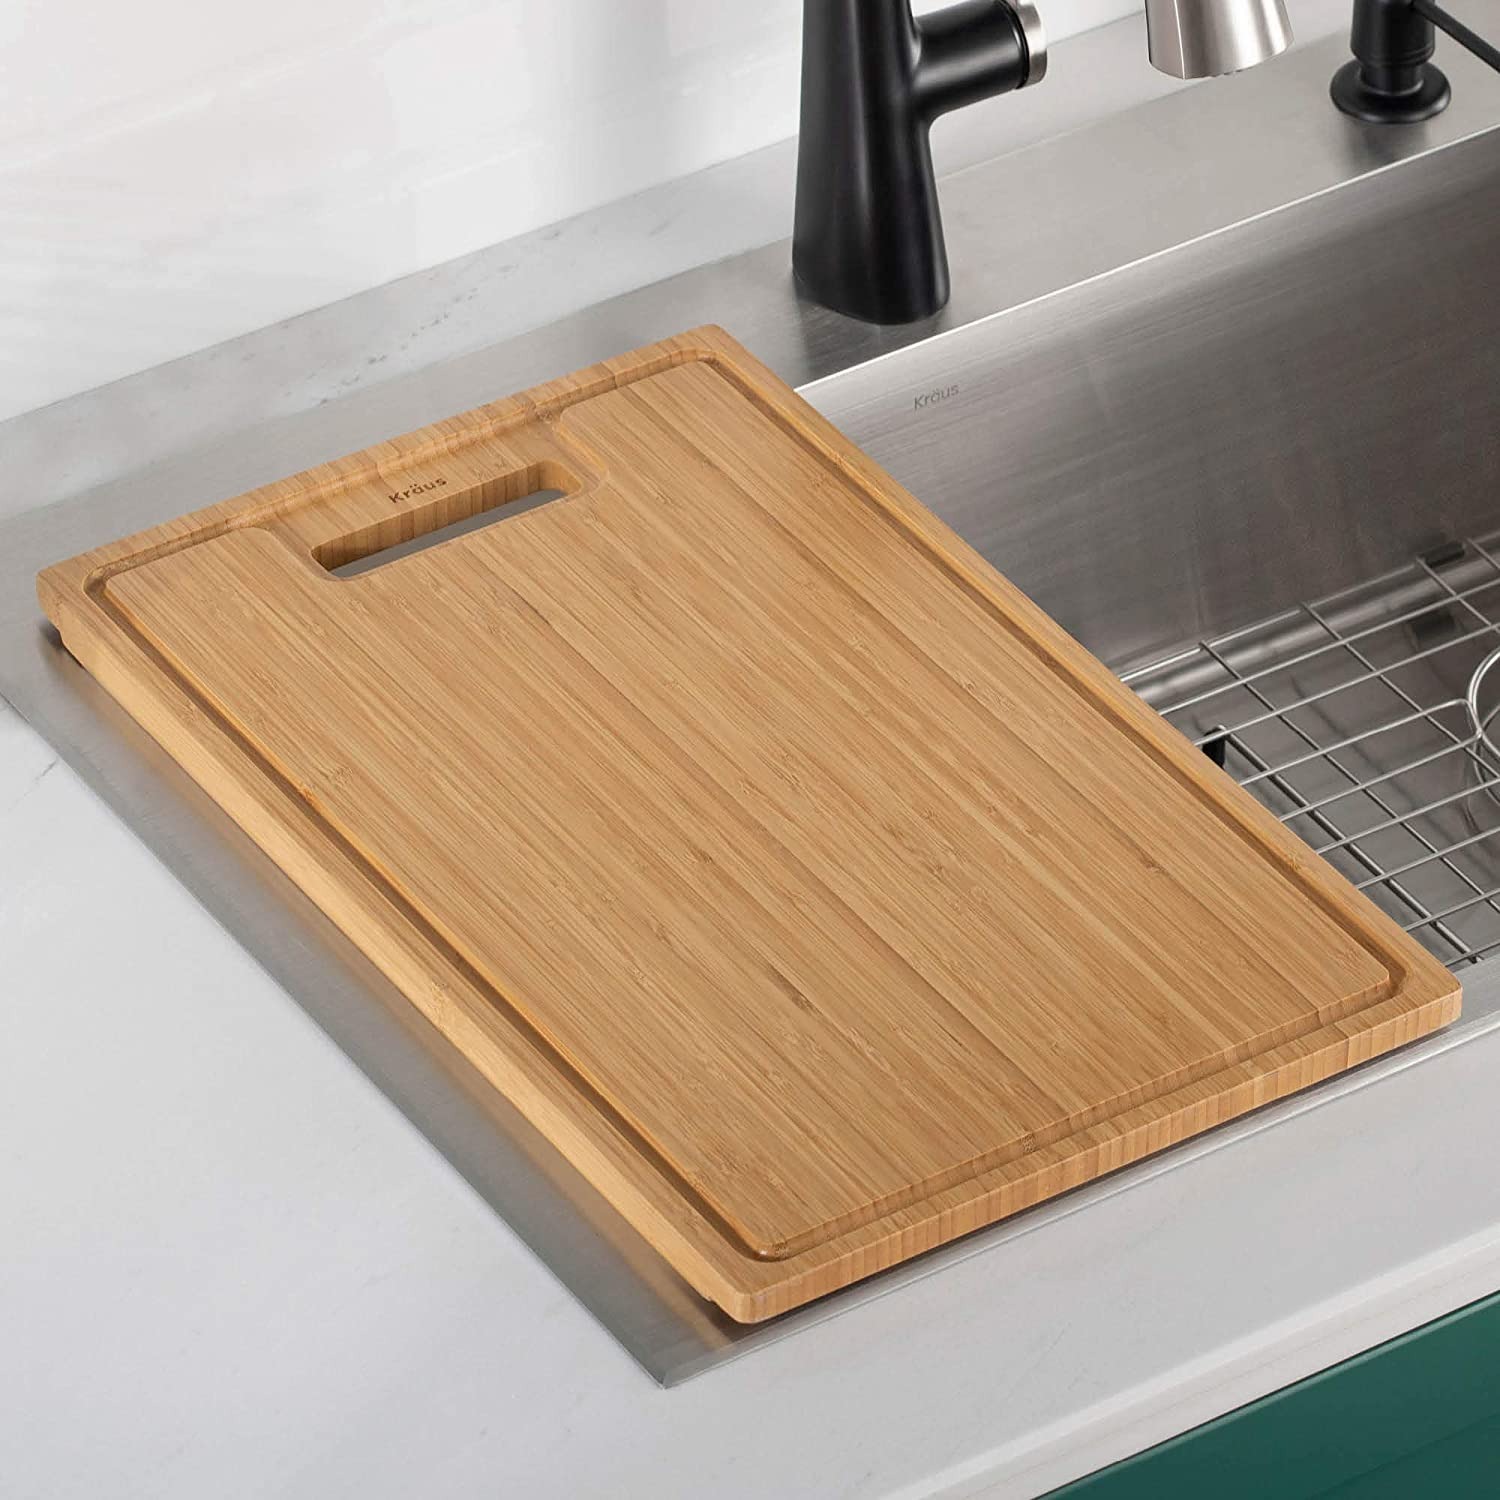 Kraus 19" x 12 1/2" Kore Over The Sink Bamboo Cutting Board $24.03 + FS w/ Prime or orders of $25+